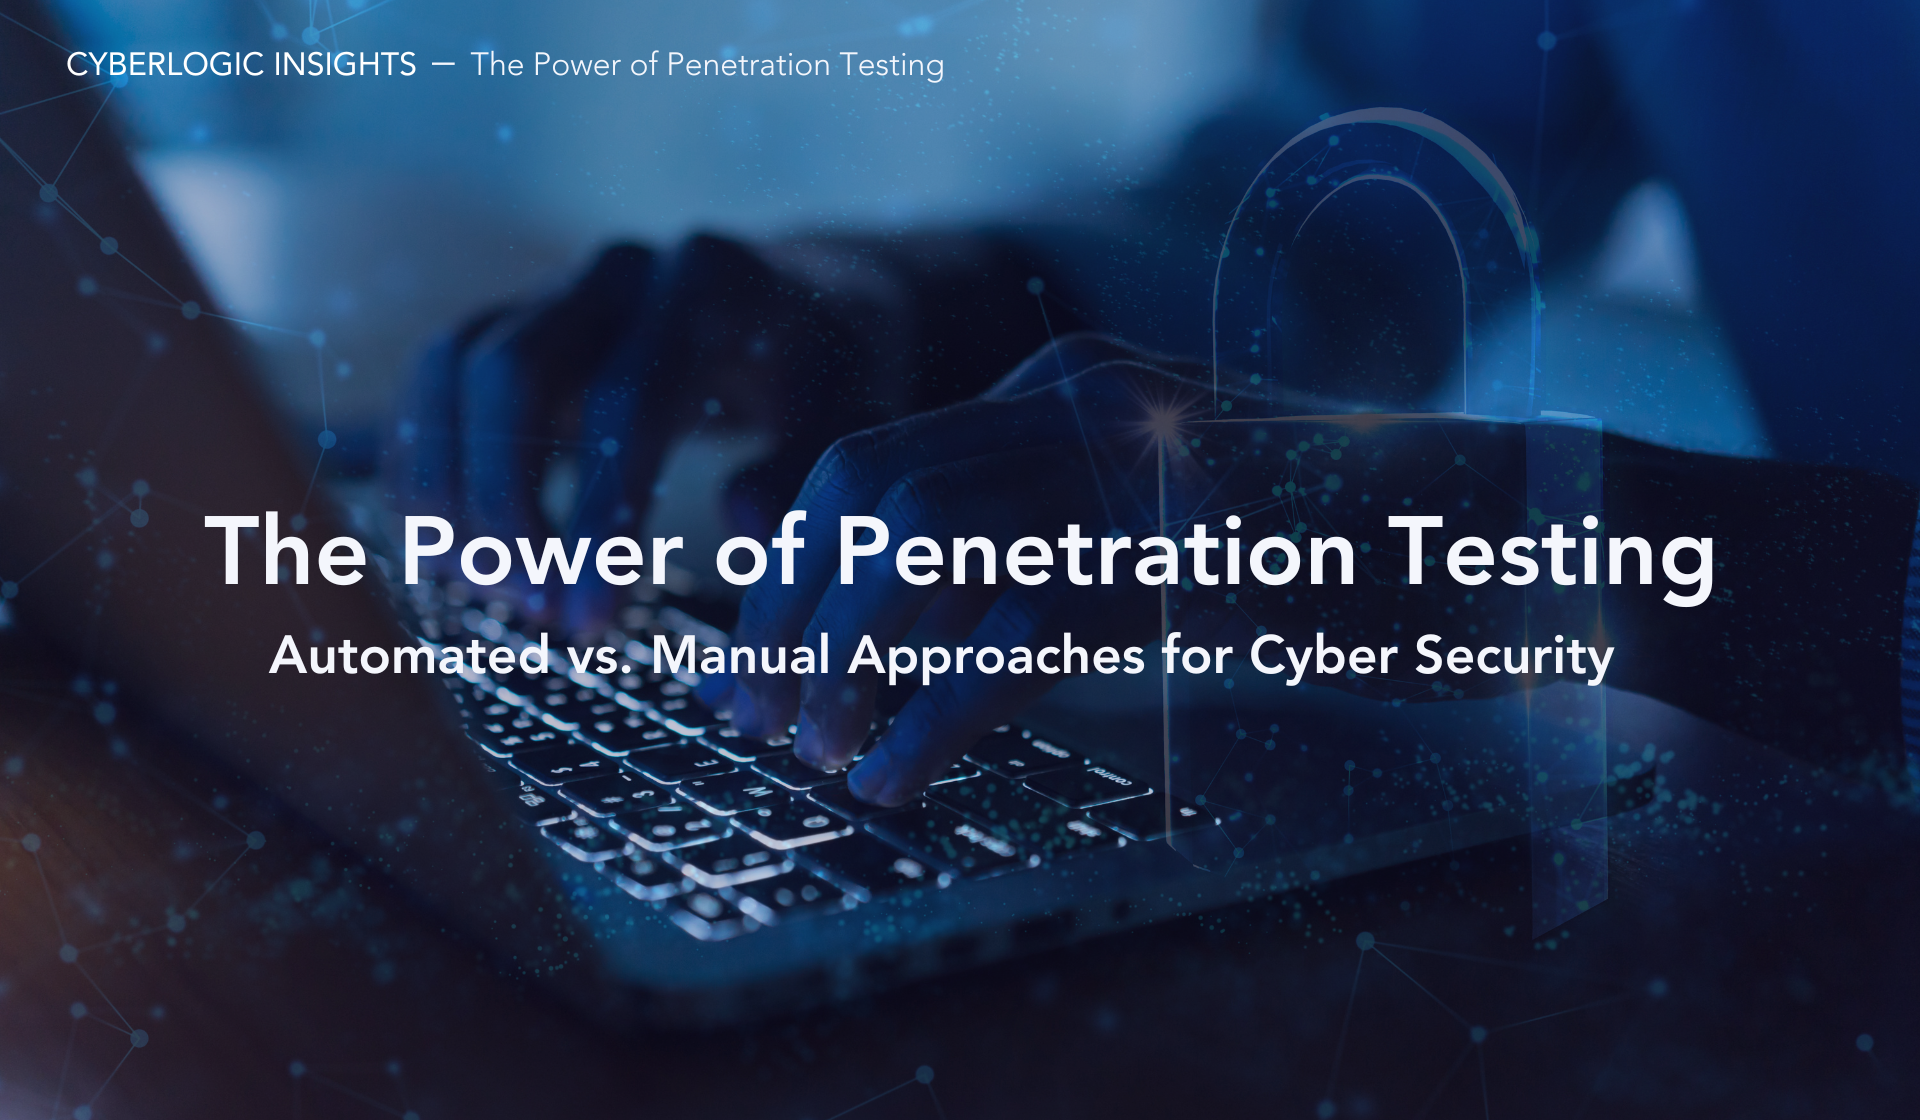 The Power of Penetration Testing: Automated vs. Manual Approaches for Cyber Security